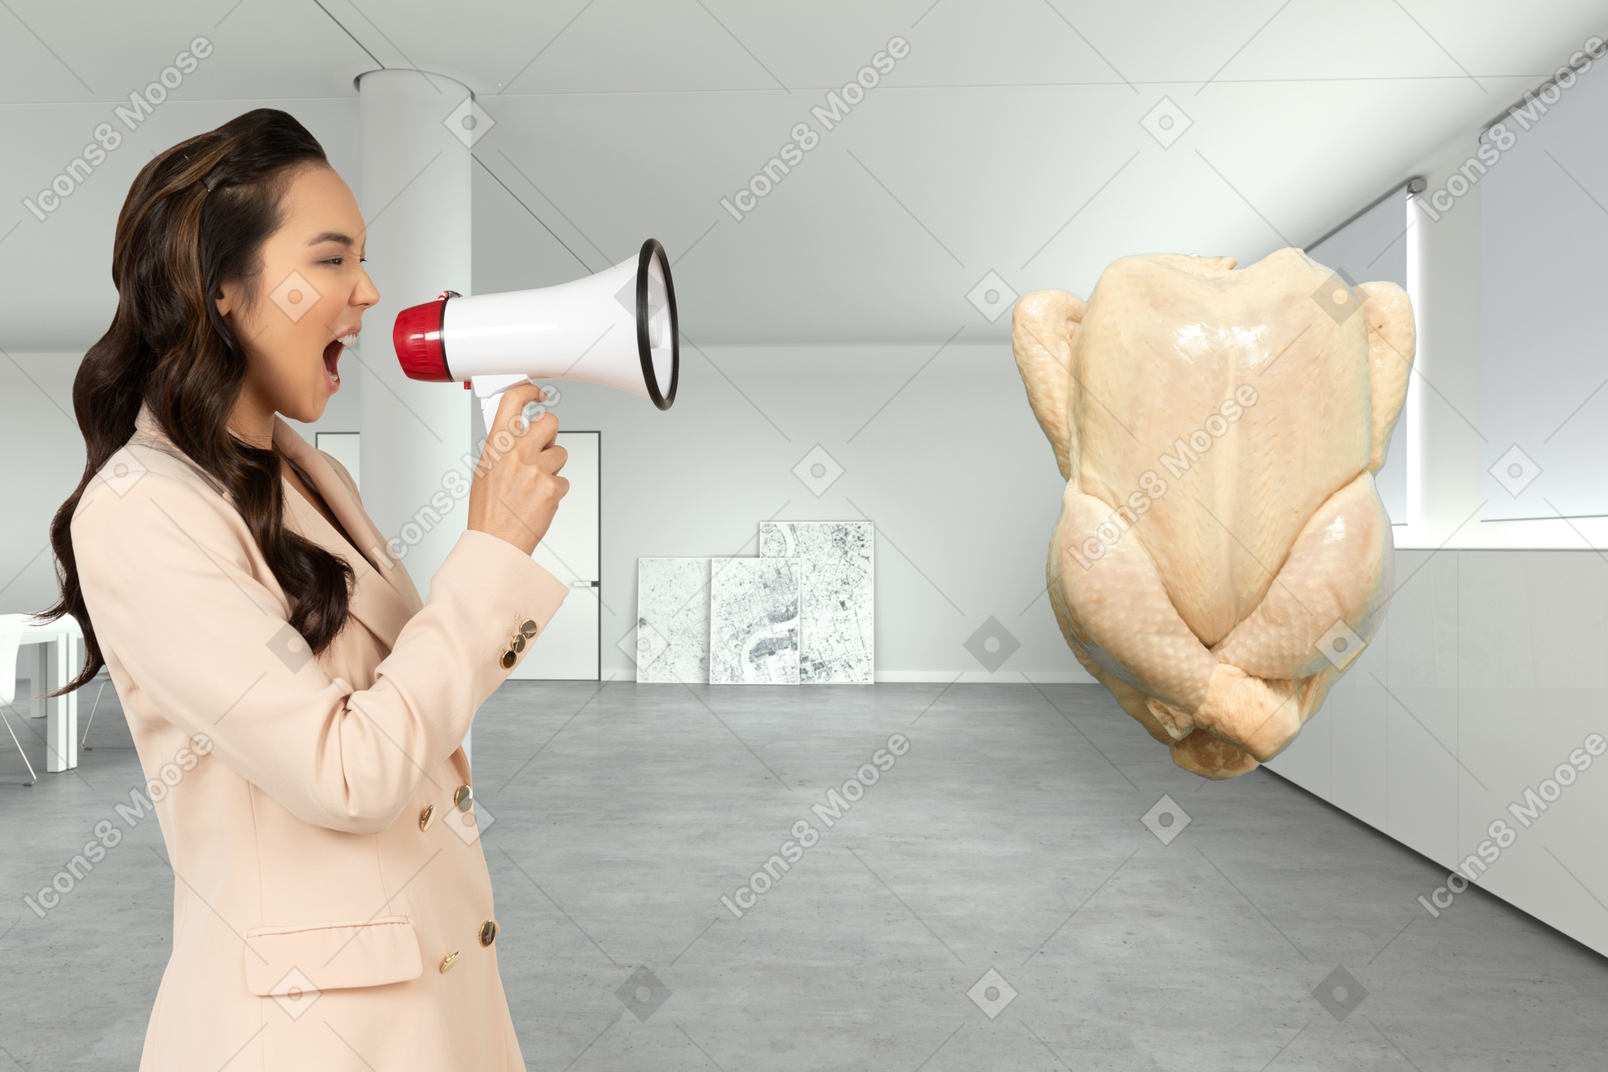 Woman shouting into a megaphone at a chicken